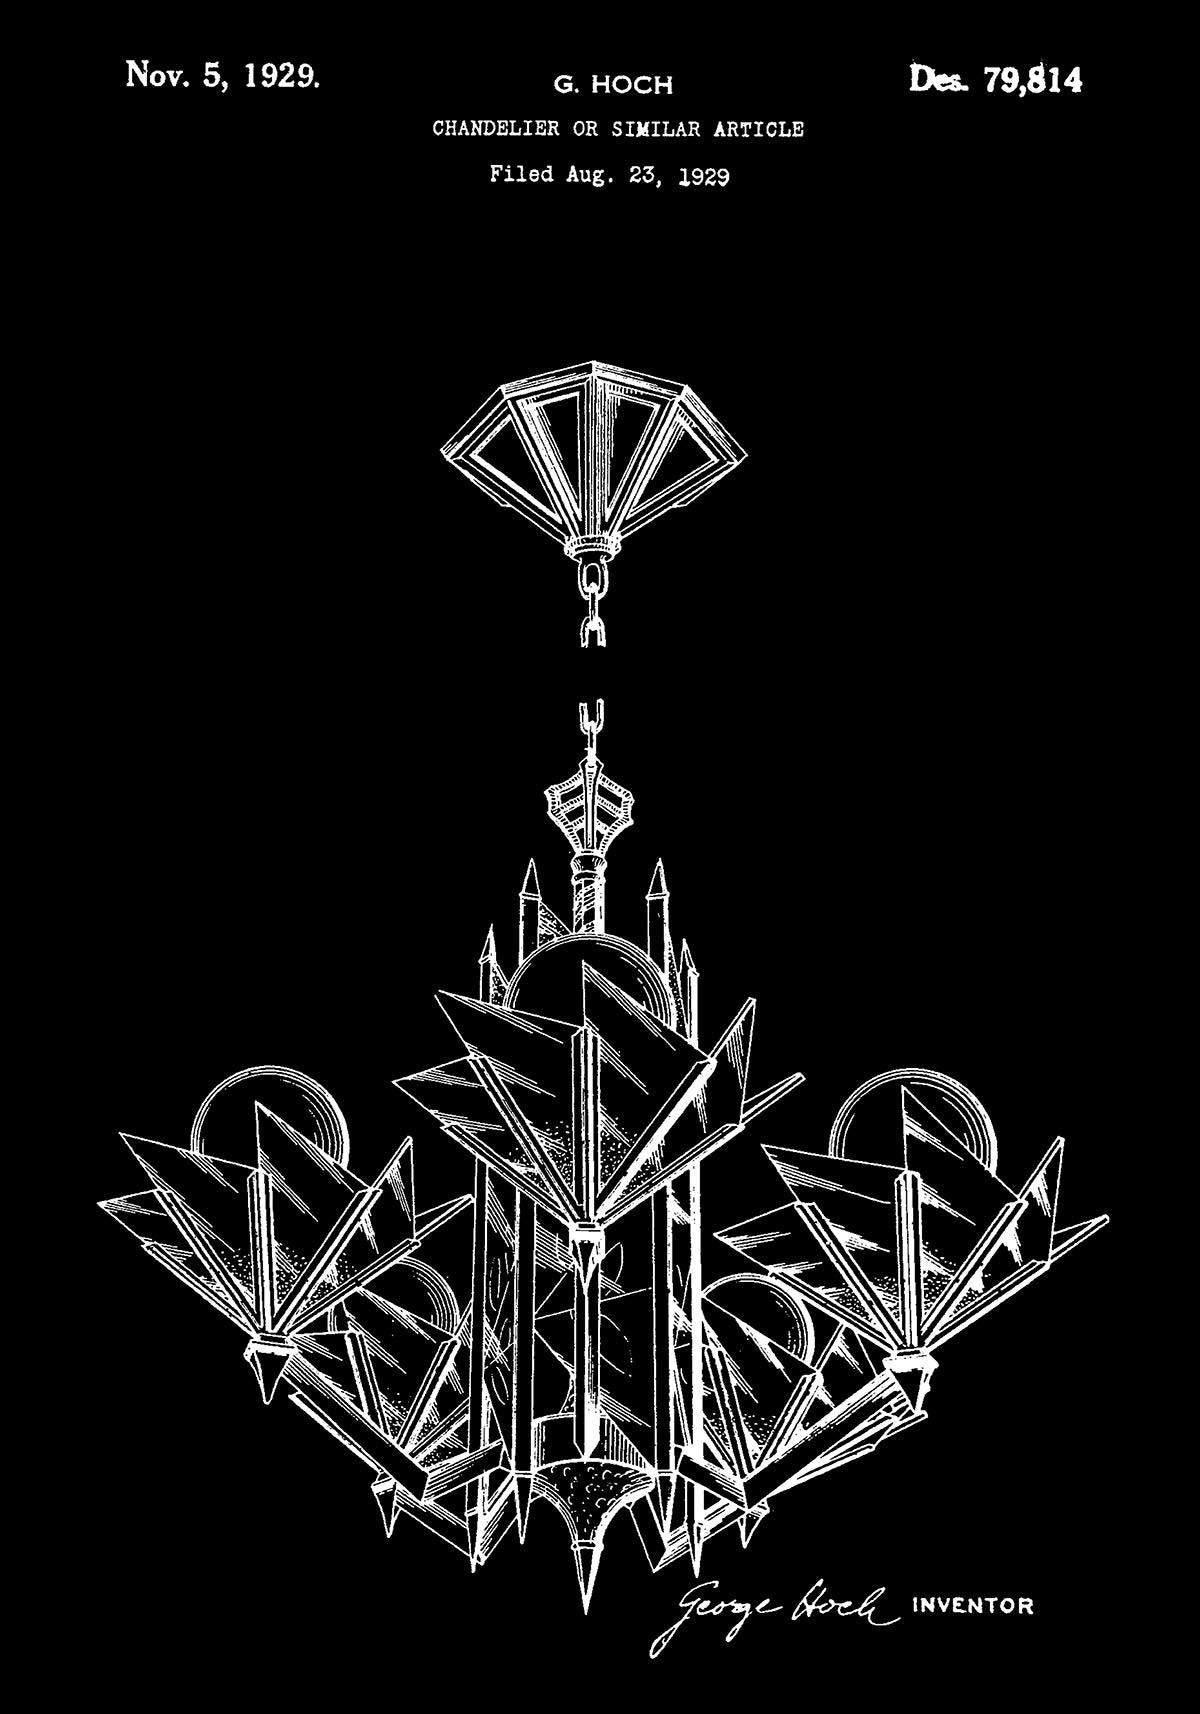 Chandelier Patent Poster